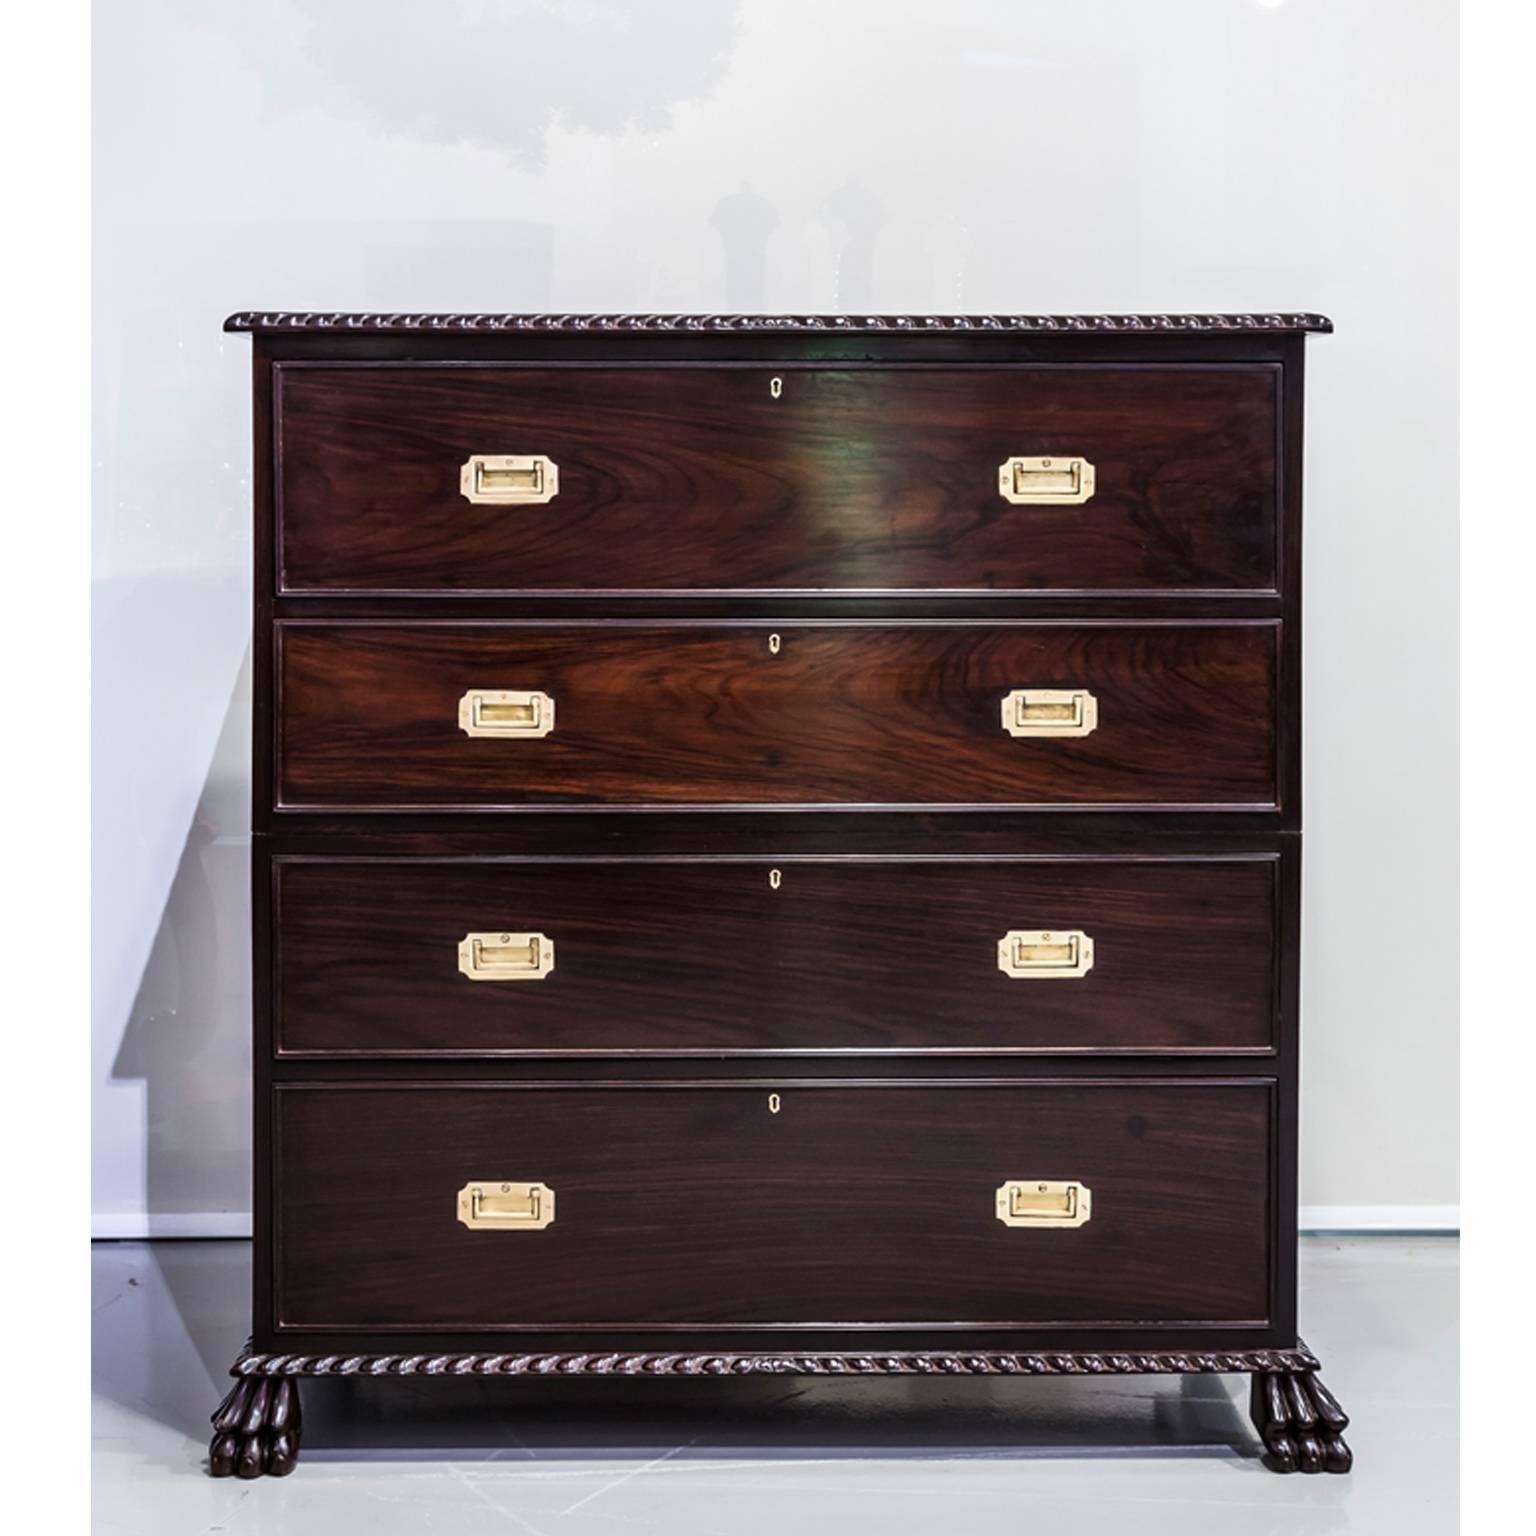 A British colonial campaign secretaire chest of drawers in two sections. The top portion with two long drawers. 
The top drawer opens to reveal a secretaire interior fitted with several (secret) compartments and drawers. The writing surface with